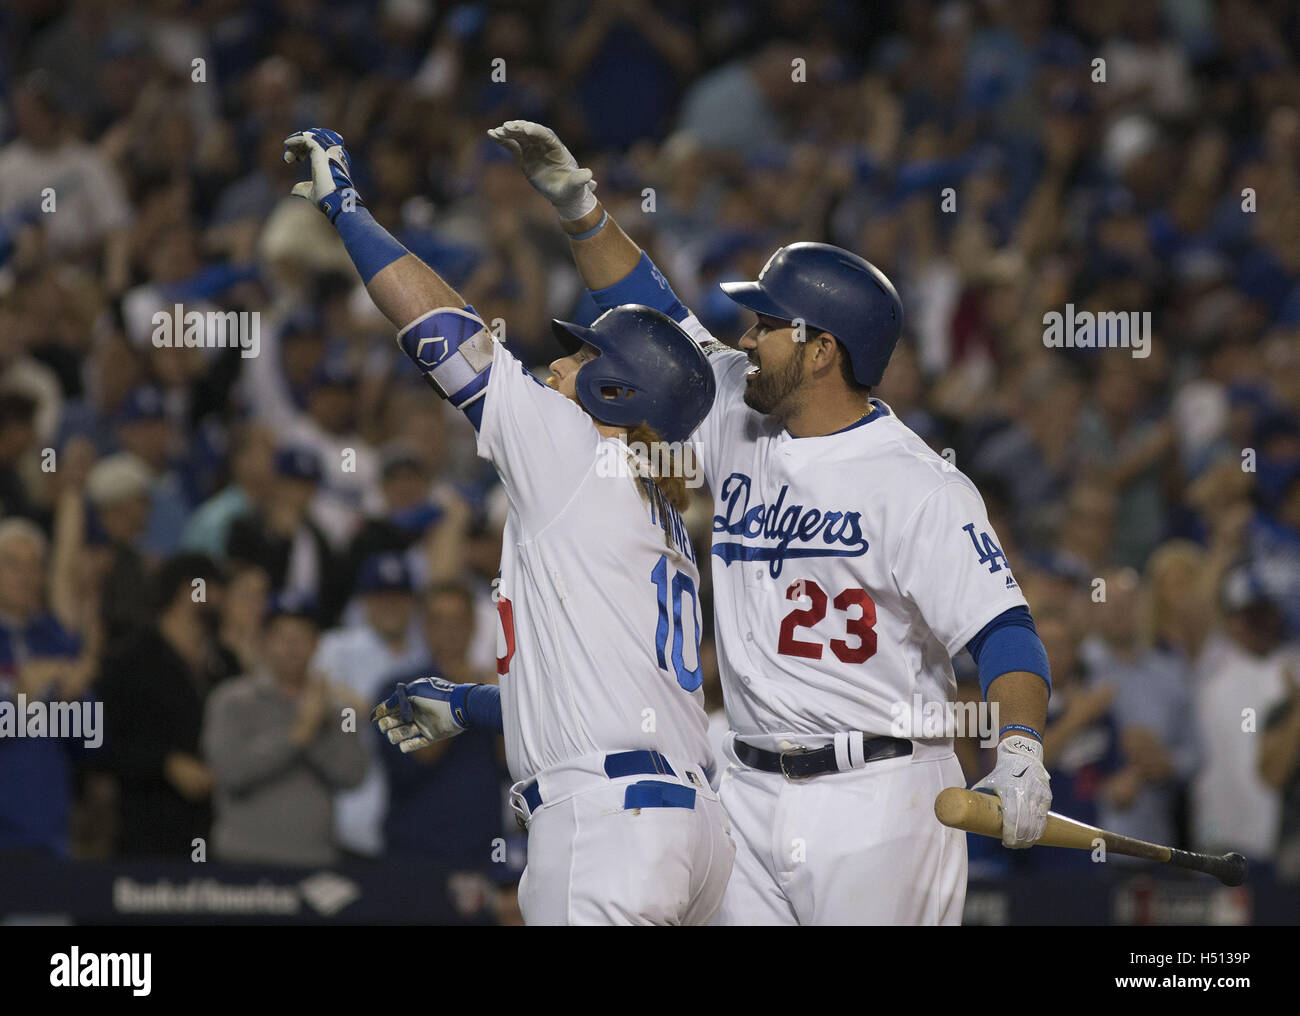 Los Angeles, CALIFORNIA, UNITED STATES OF AMERICA, USA. 18th Oct, 2016. Adrian Gonzalez celebrates with Justin Turner (10) of the Los Angeles Dodgers after hitting a home run against the Chicago Cubs in the fifth inning of game three of the National League Championship Series at Dodger Stadium on October 18, 2016 in Los Angeles, California.Los Angeles Dodgers won the game 6-0 to take the lead 2 games to 1 .ARMANDO ARORIZO Credit:  Armando Arorizo/Prensa Internacional/ZUMA Wire/Alamy Live News Stock Photo